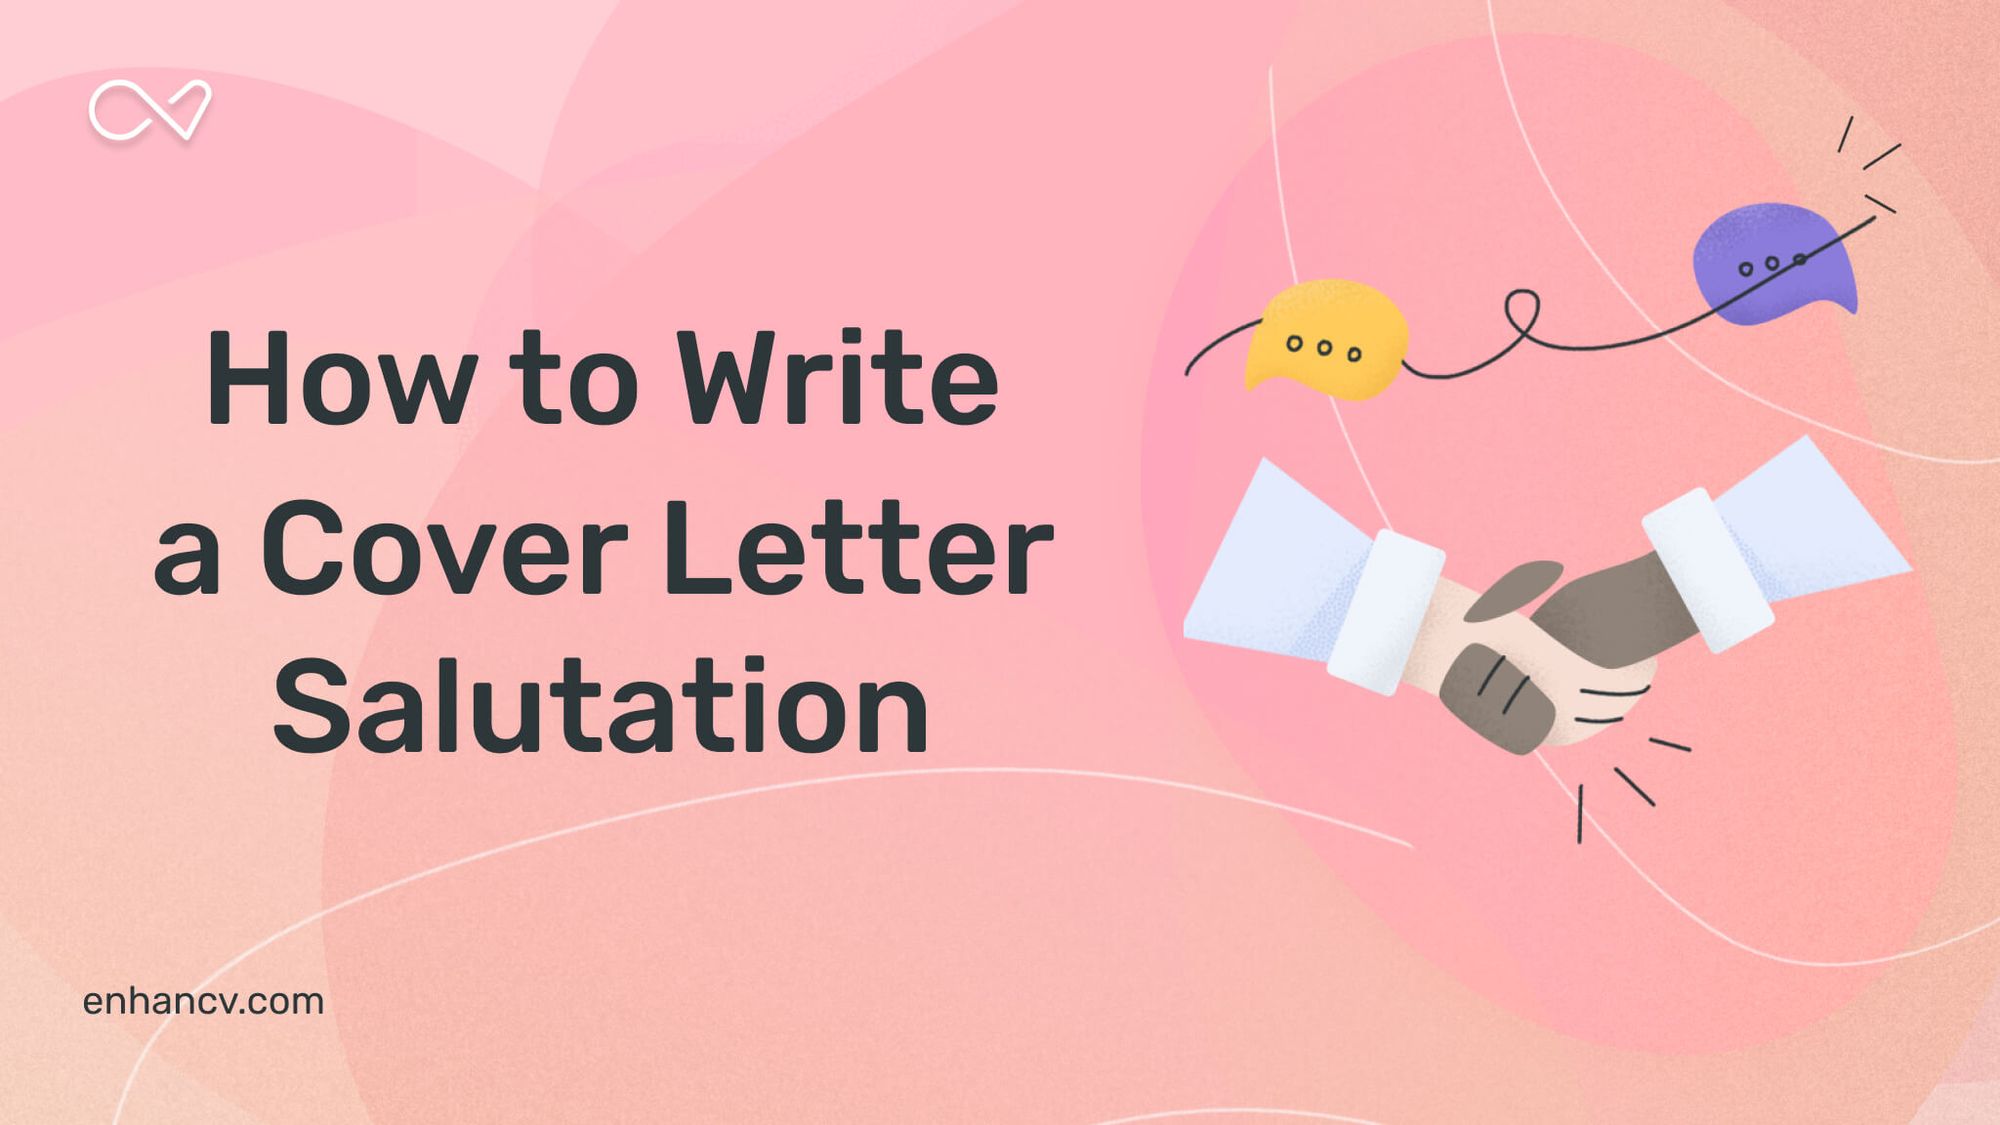 what salutation should i use for a cover letter